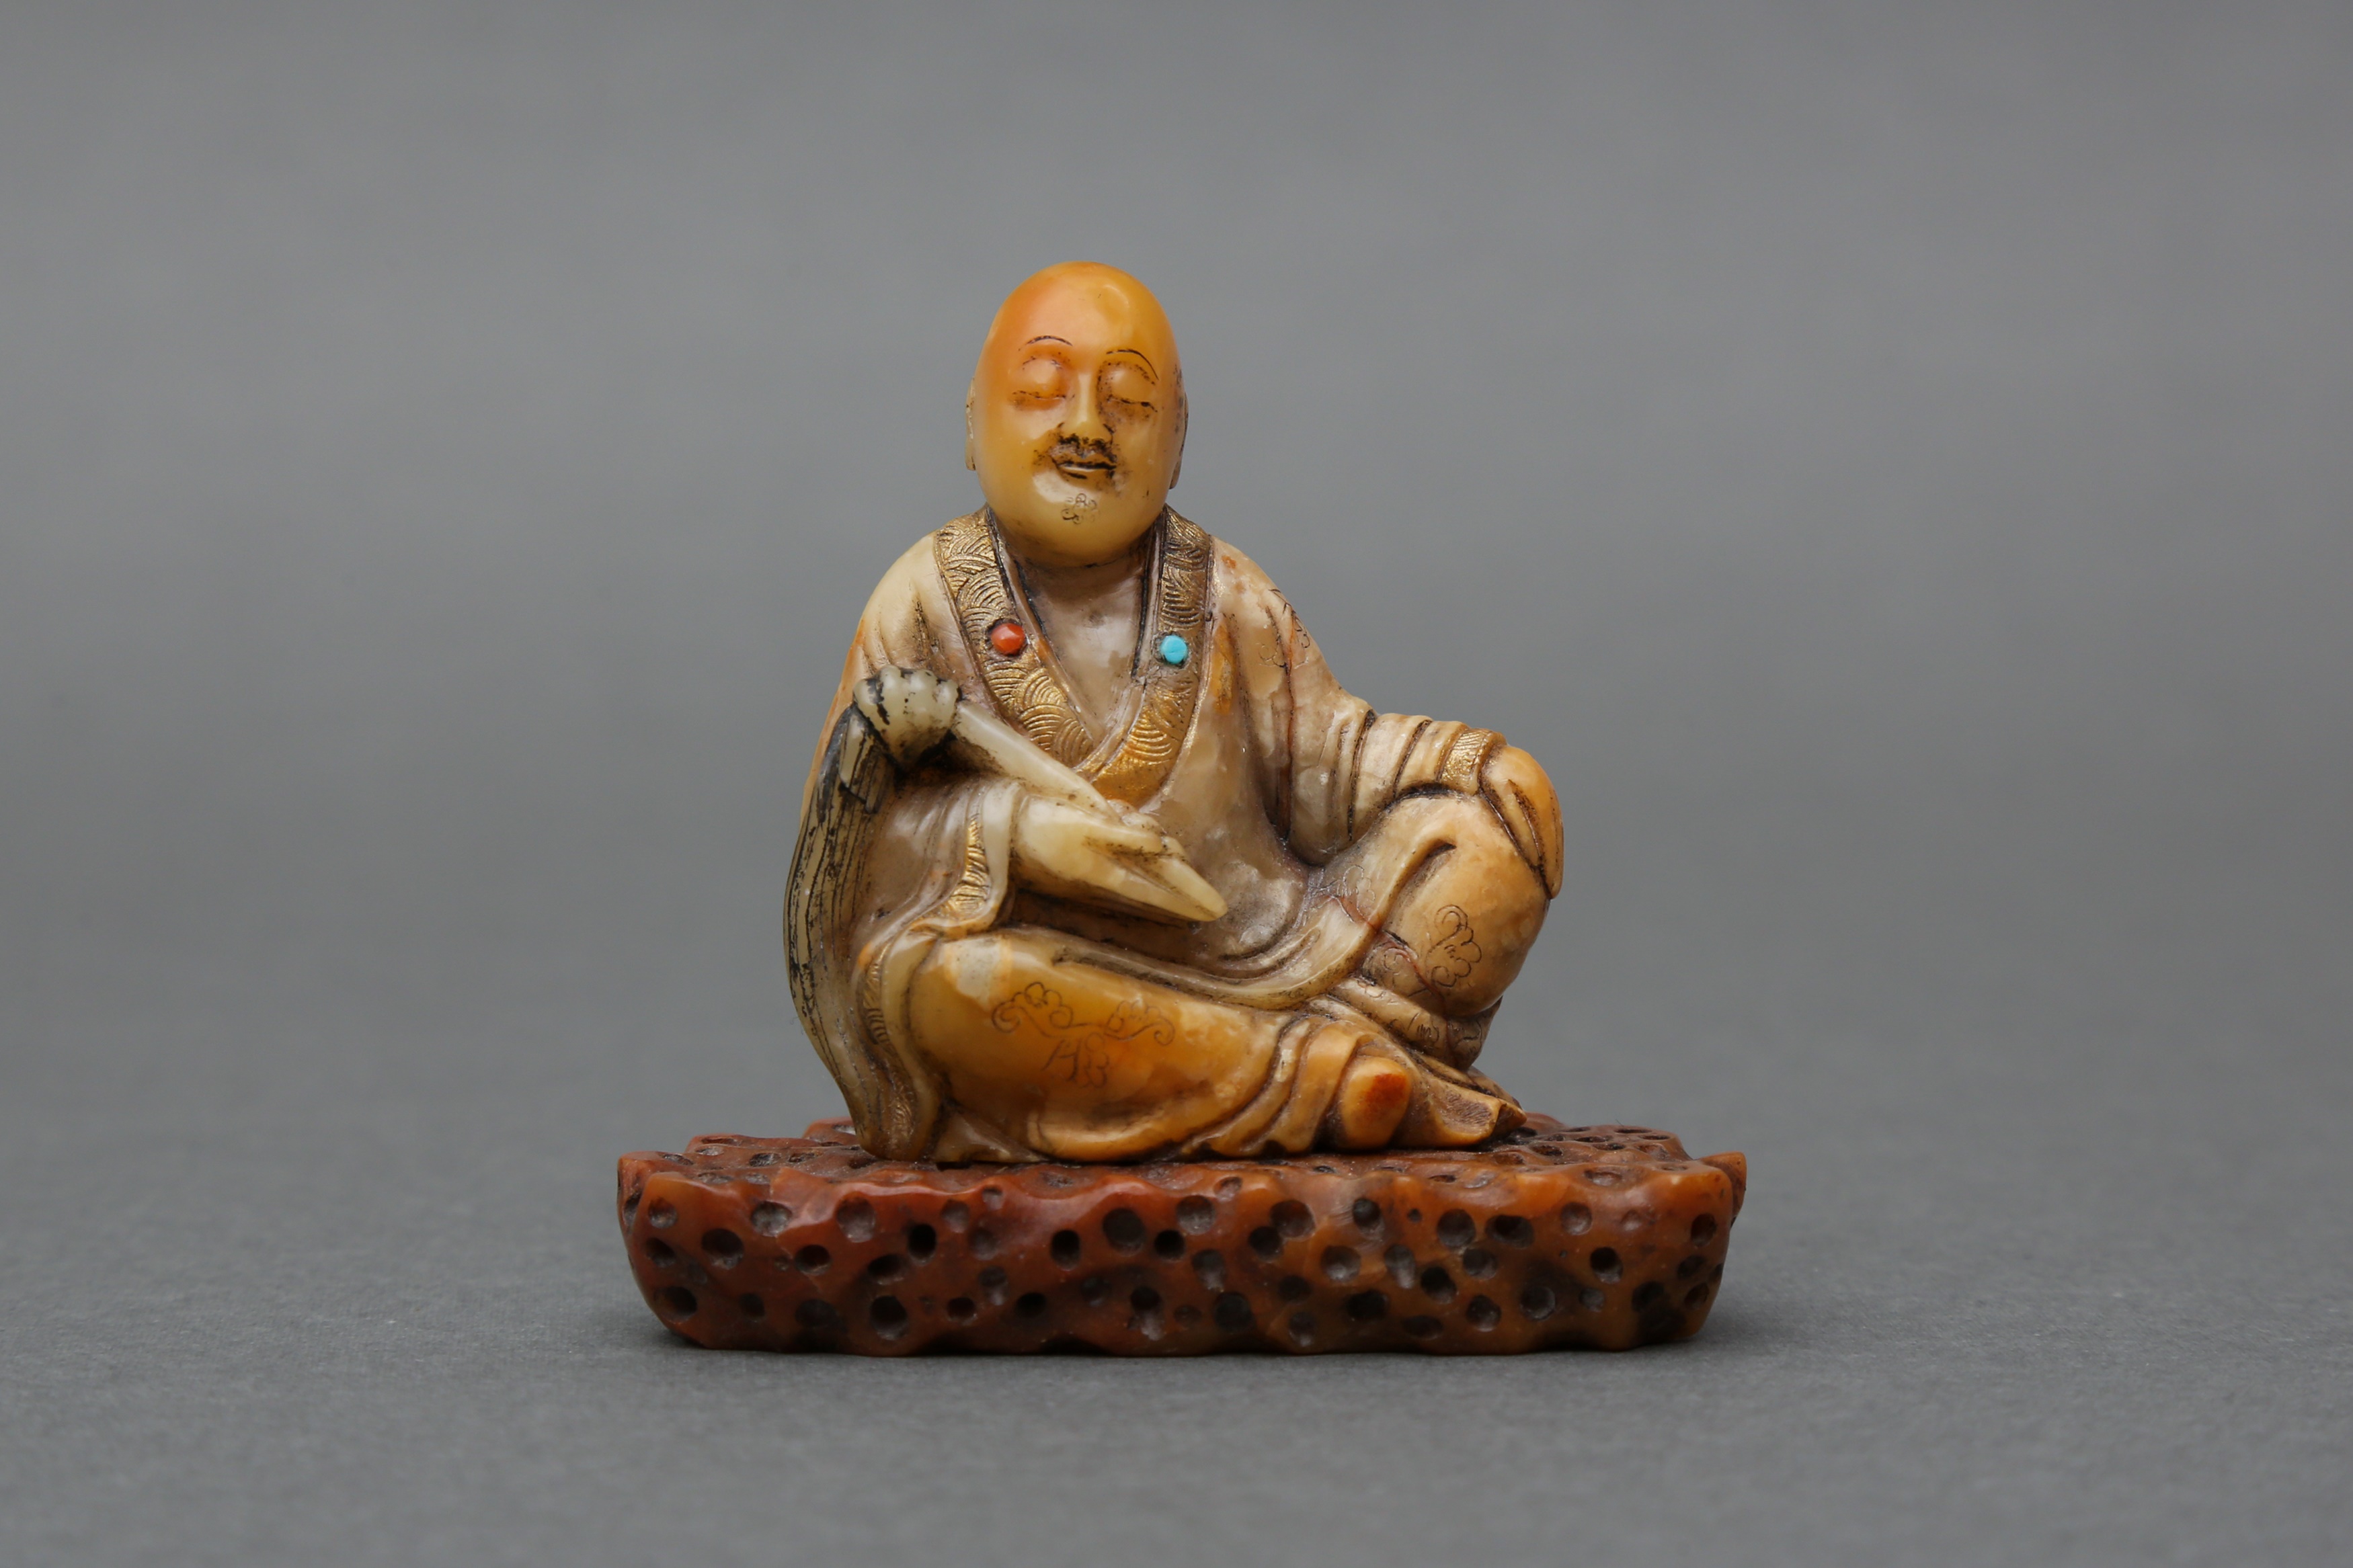 A FINE CHINESE SOAPSTONE FIGURE OF A SEATED LOUHAN, ATTRIBUTED TO ZHOU BIN 十七至十八世紀 傳周彬製 壽山石羅漢臥像擺件 《尚